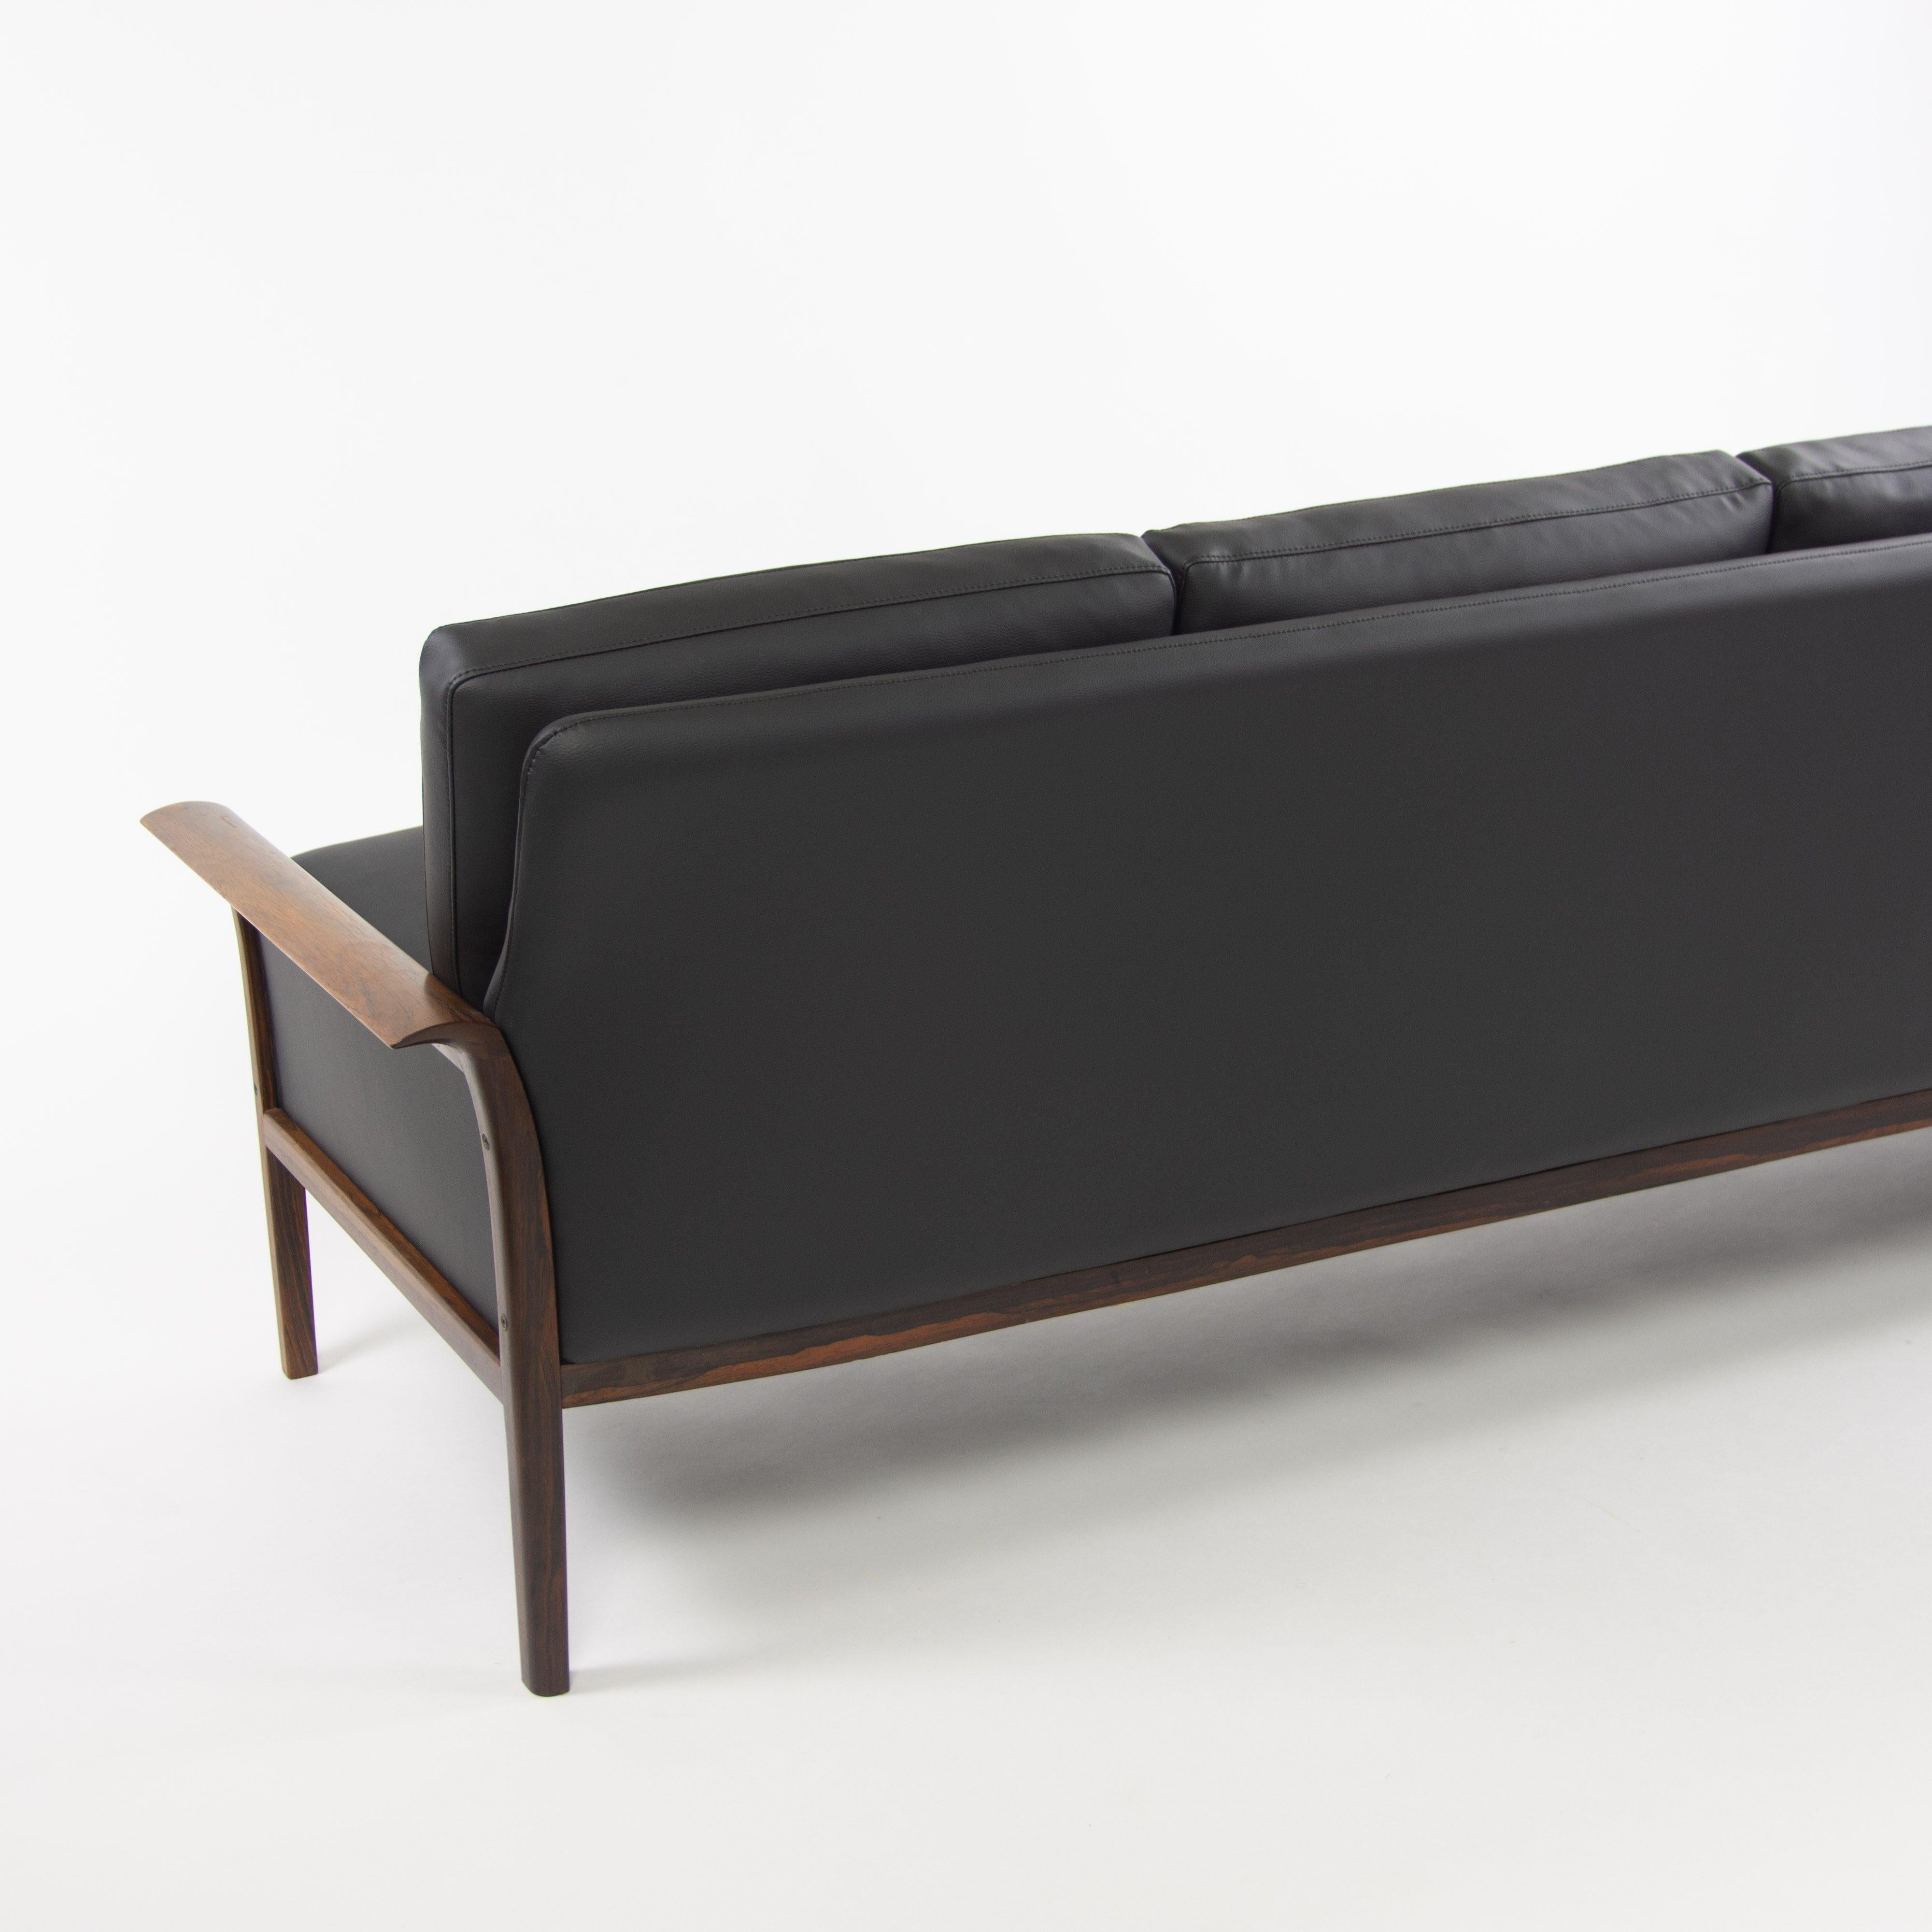 Faux Leather 1960's Knut Saeter Rosewood Sofa for Vatne Mobler Norway New Black Upholstery For Sale